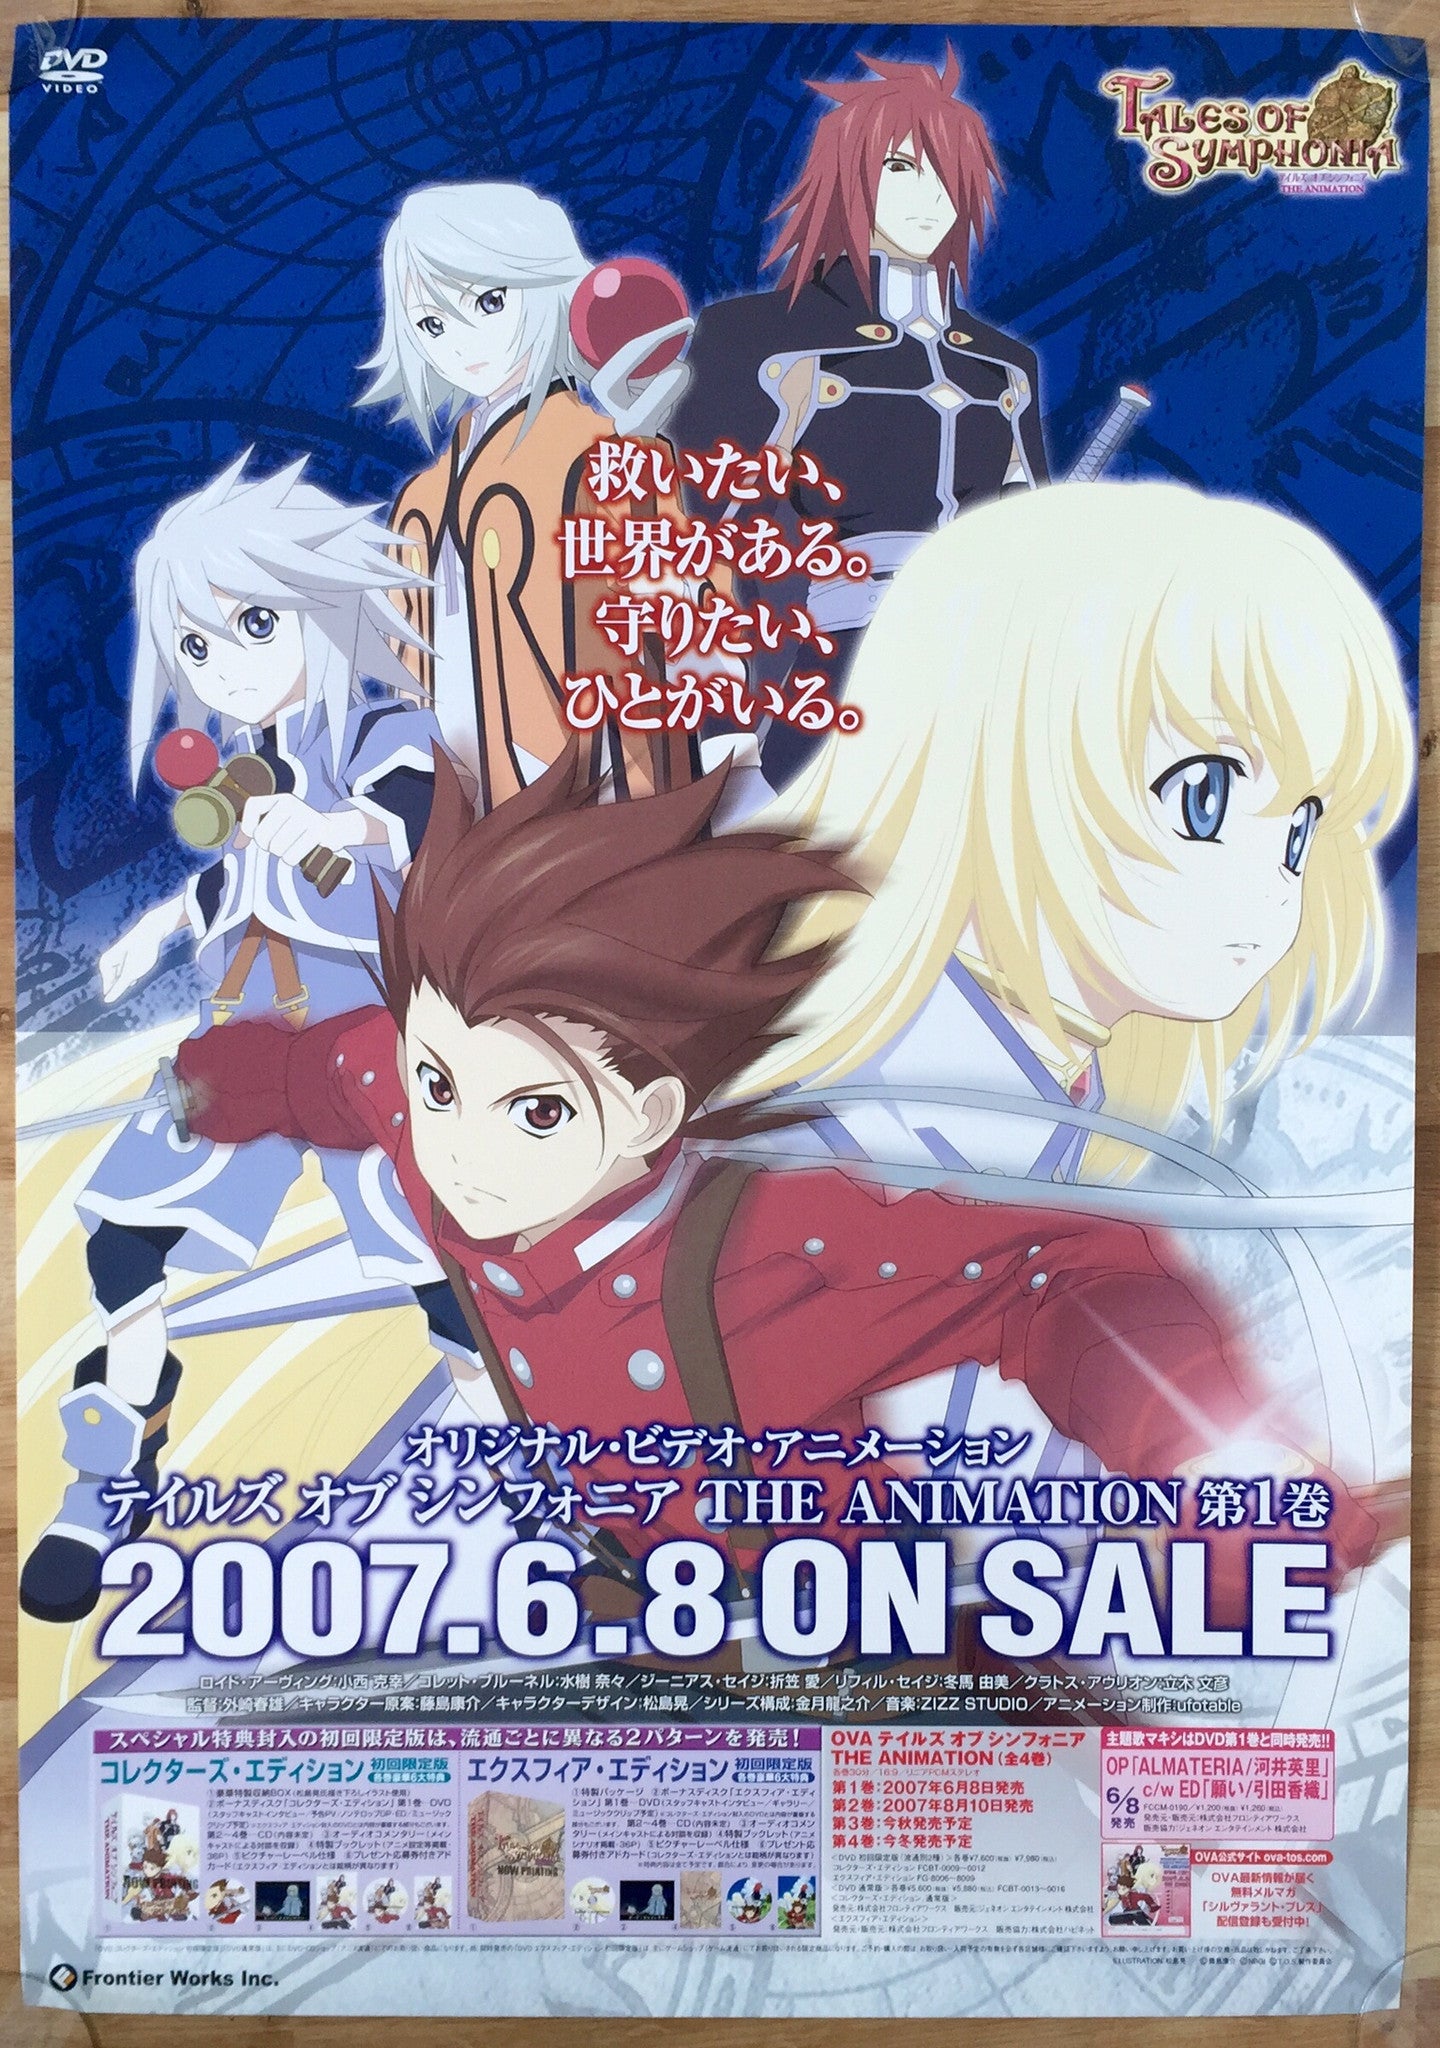 Tales of Symphonia (B2) Japanese Promotional Poster #4